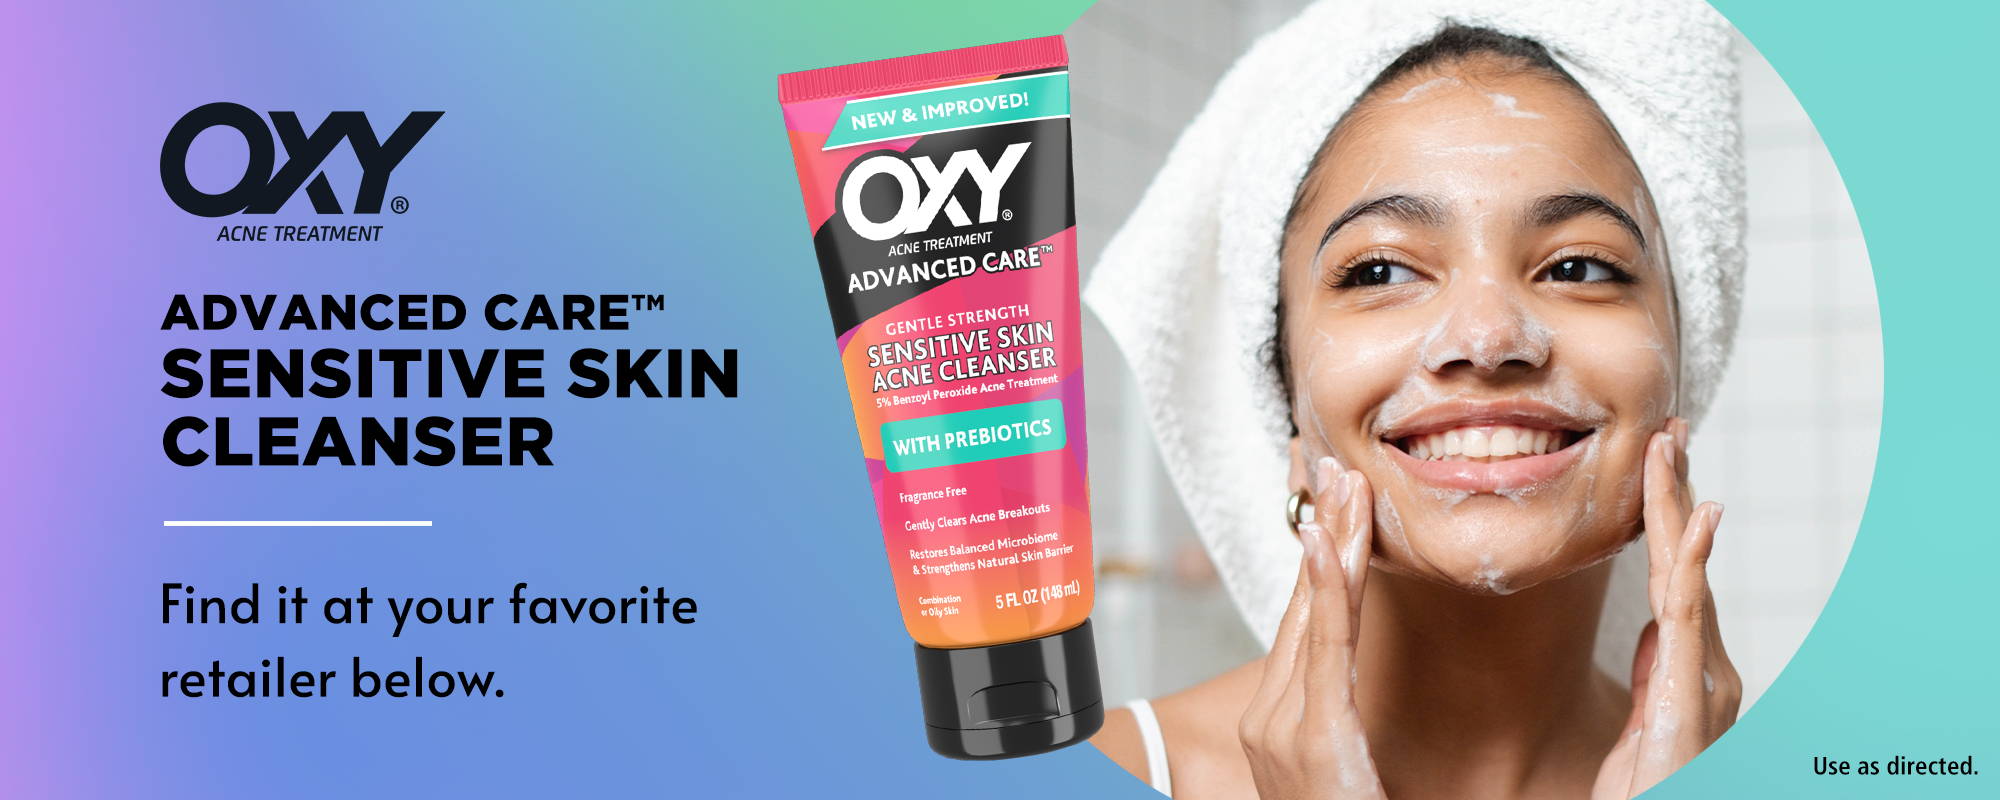 oxy-advanced-care-sensitive-wash-ps-landing-page-oxy-skin-care